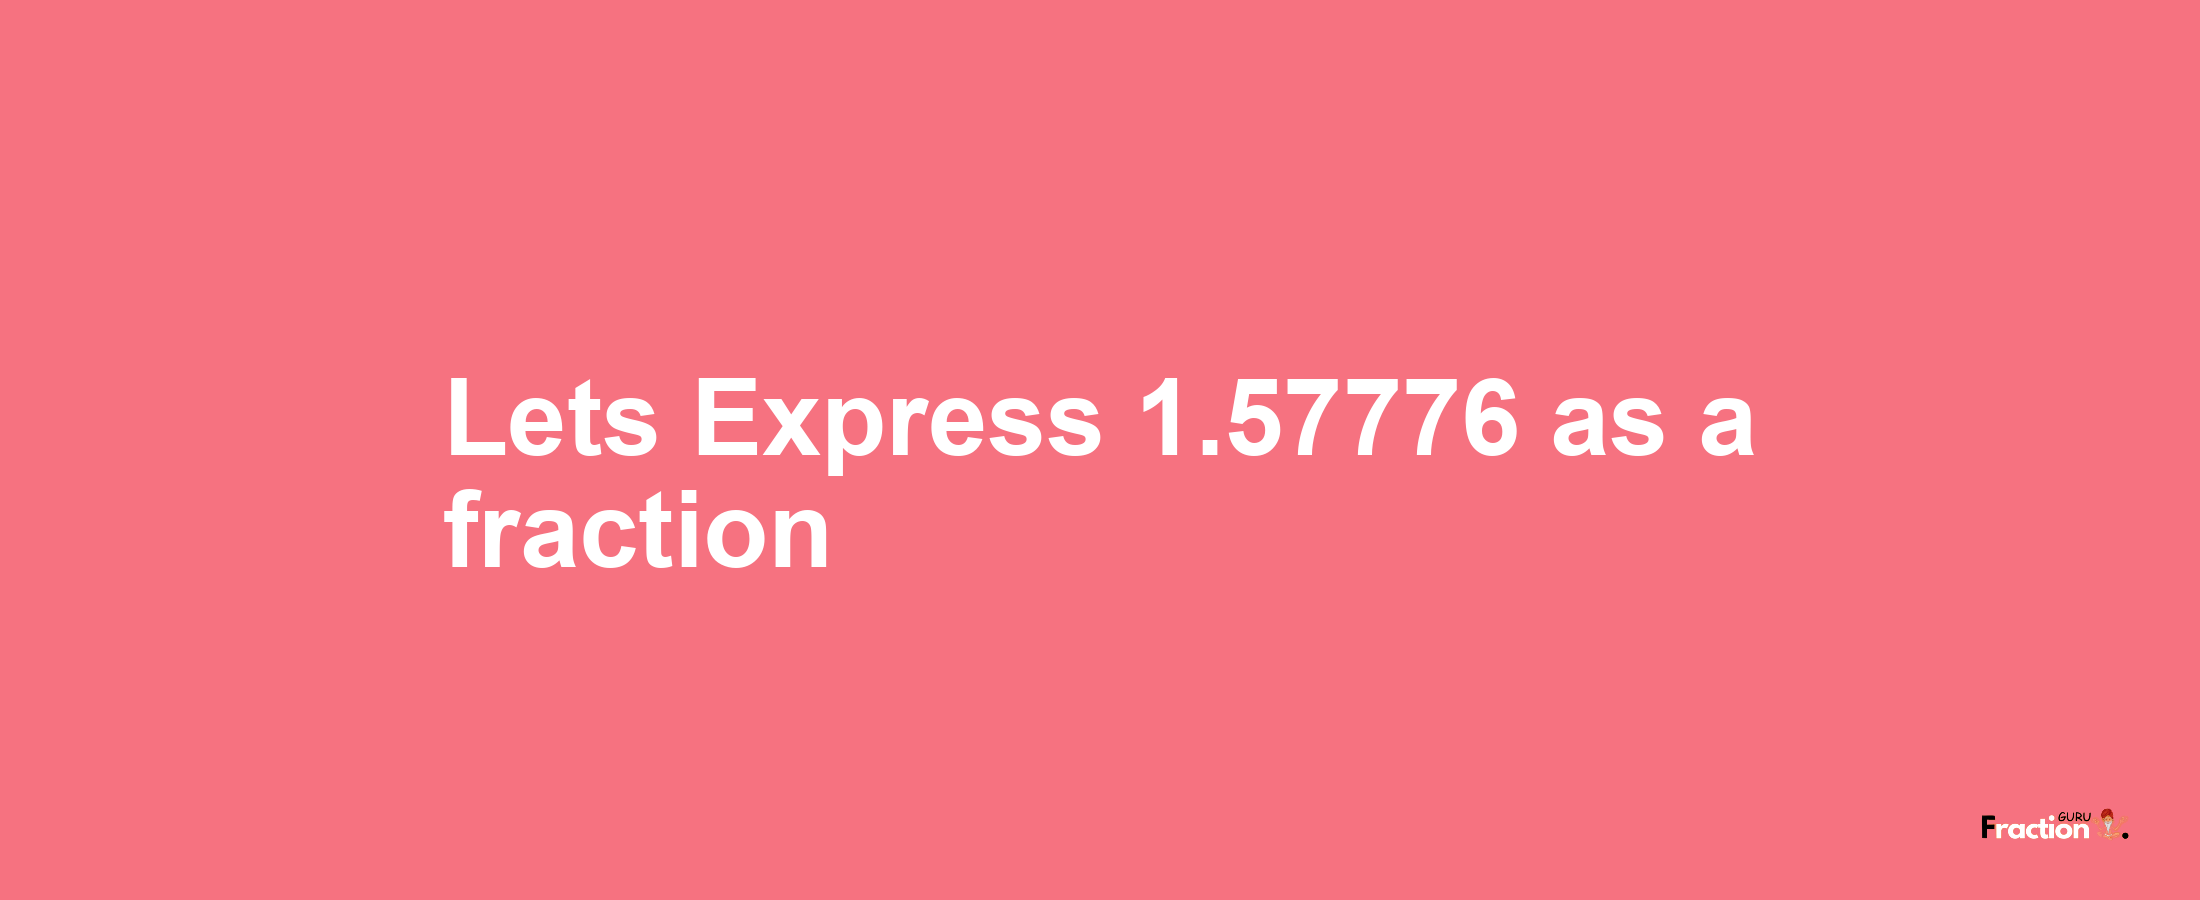 Lets Express 1.57776 as afraction